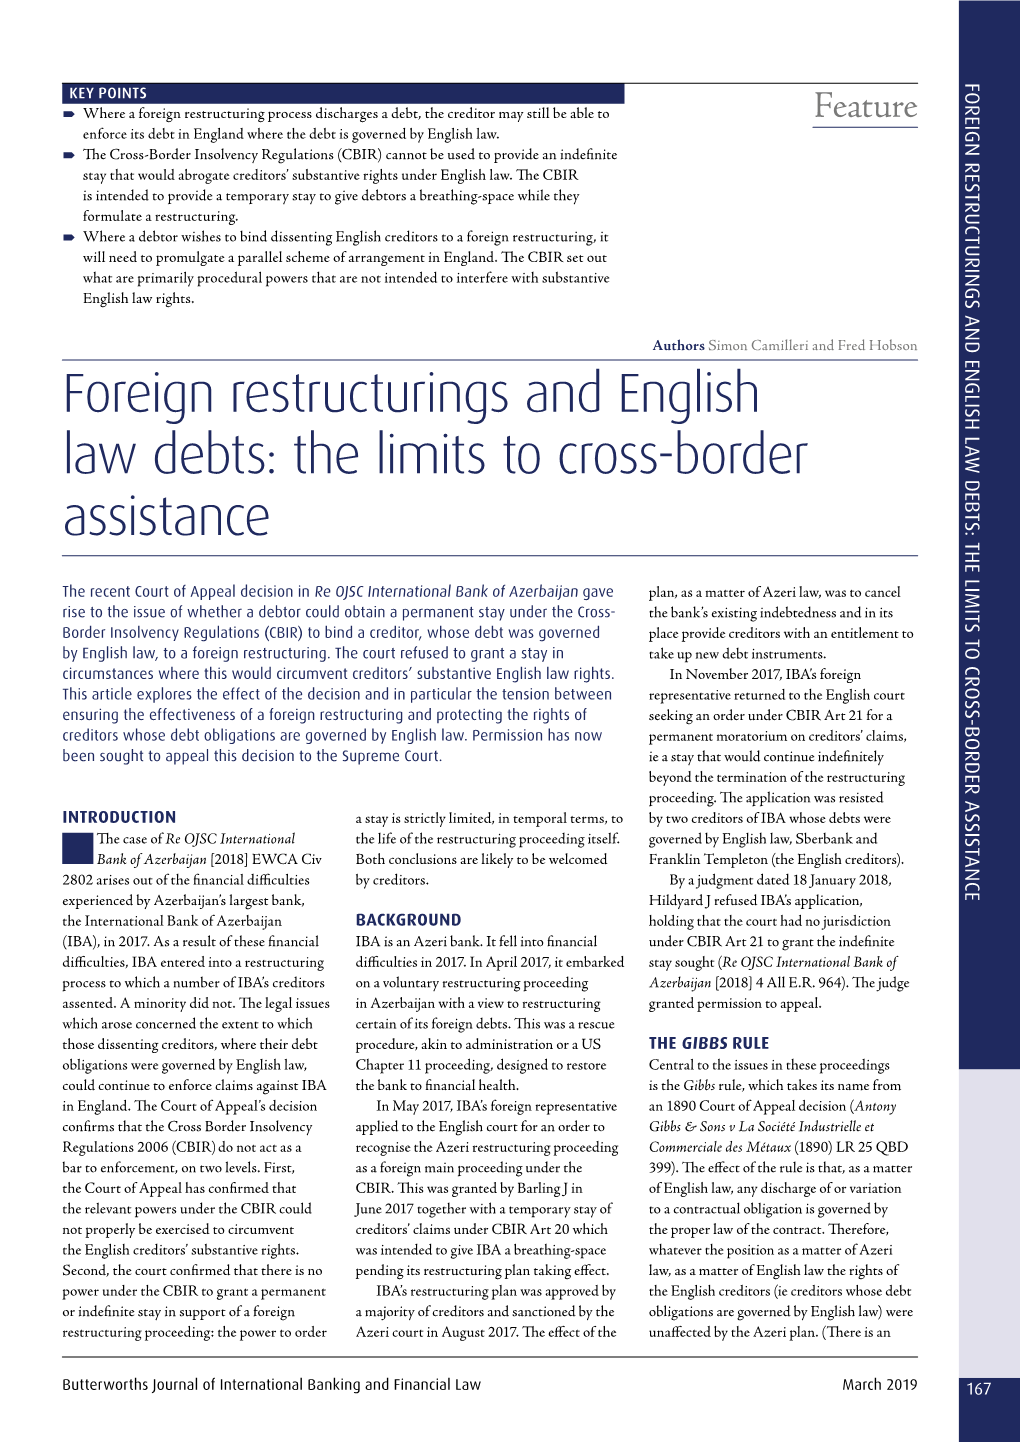 Foreign Restructurings and English Law Debts: the Limits to Cross-Border Assistance